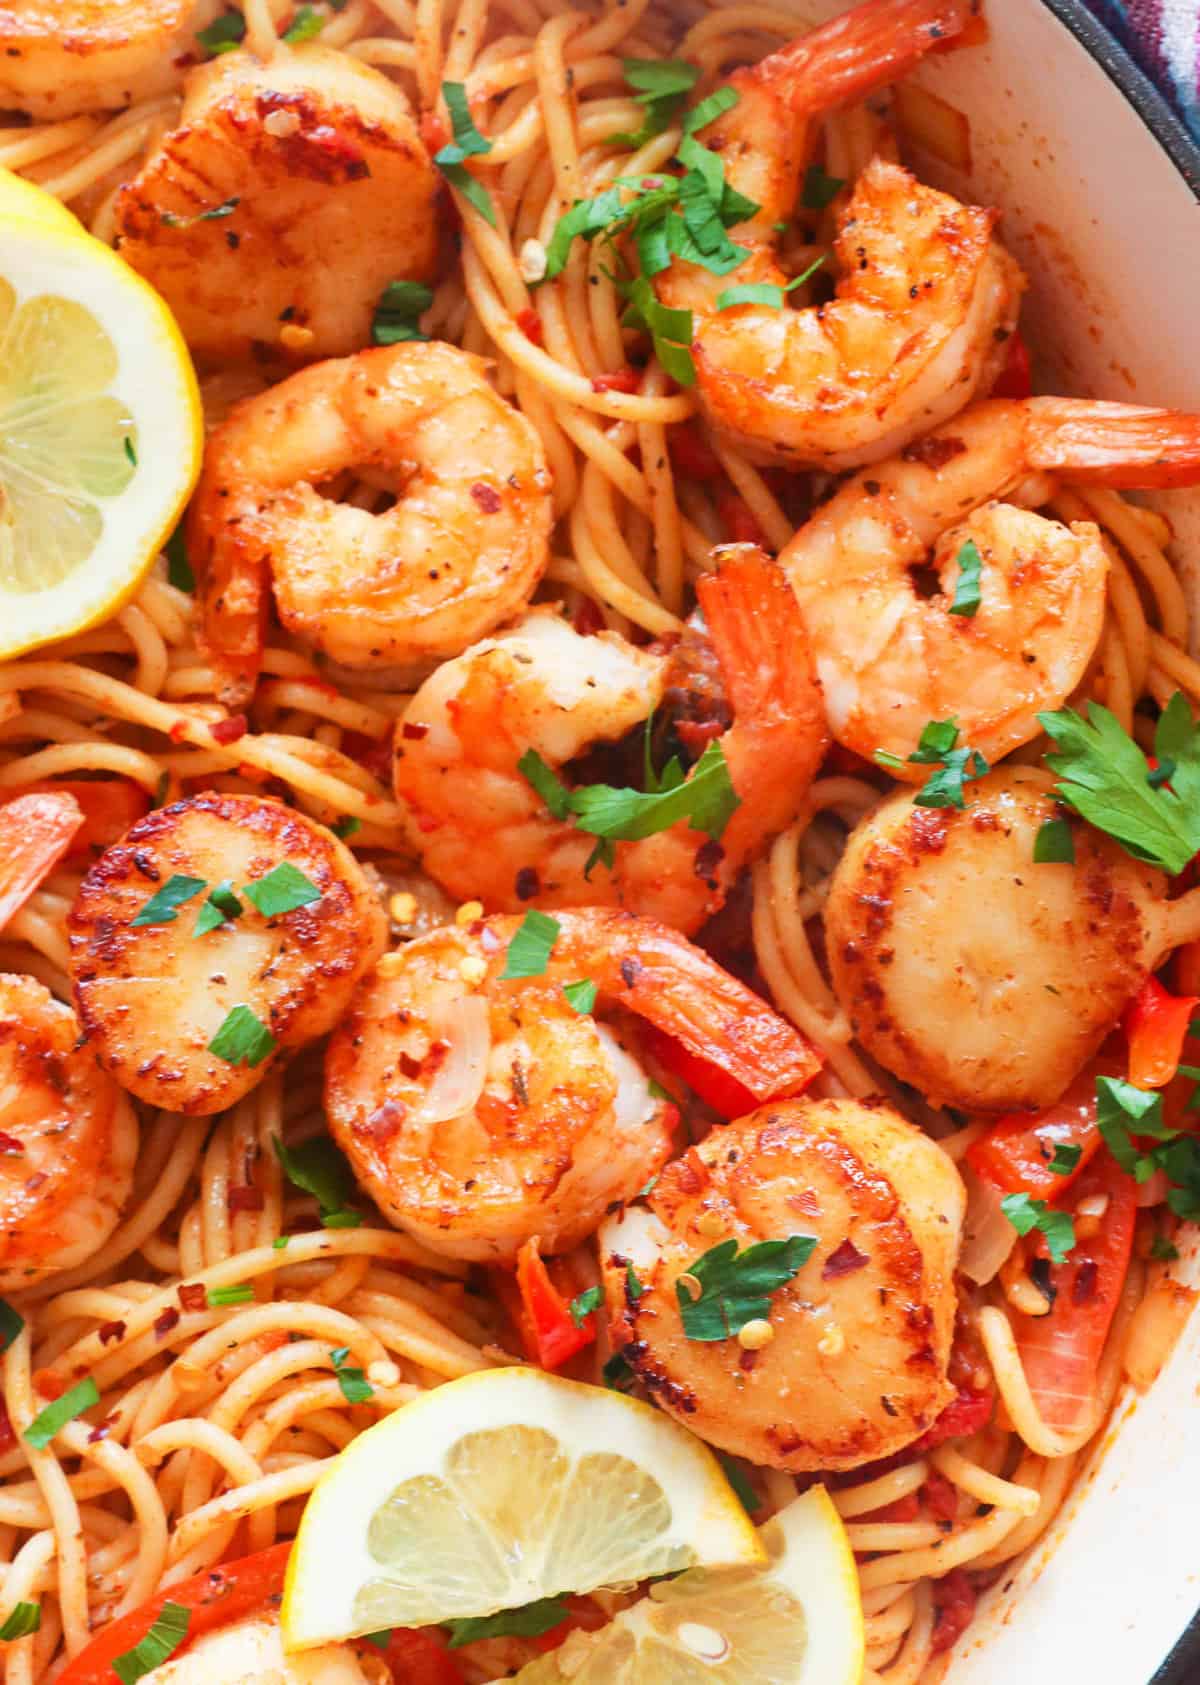 Insanely delicious seafood pasta with shrimp and scallops